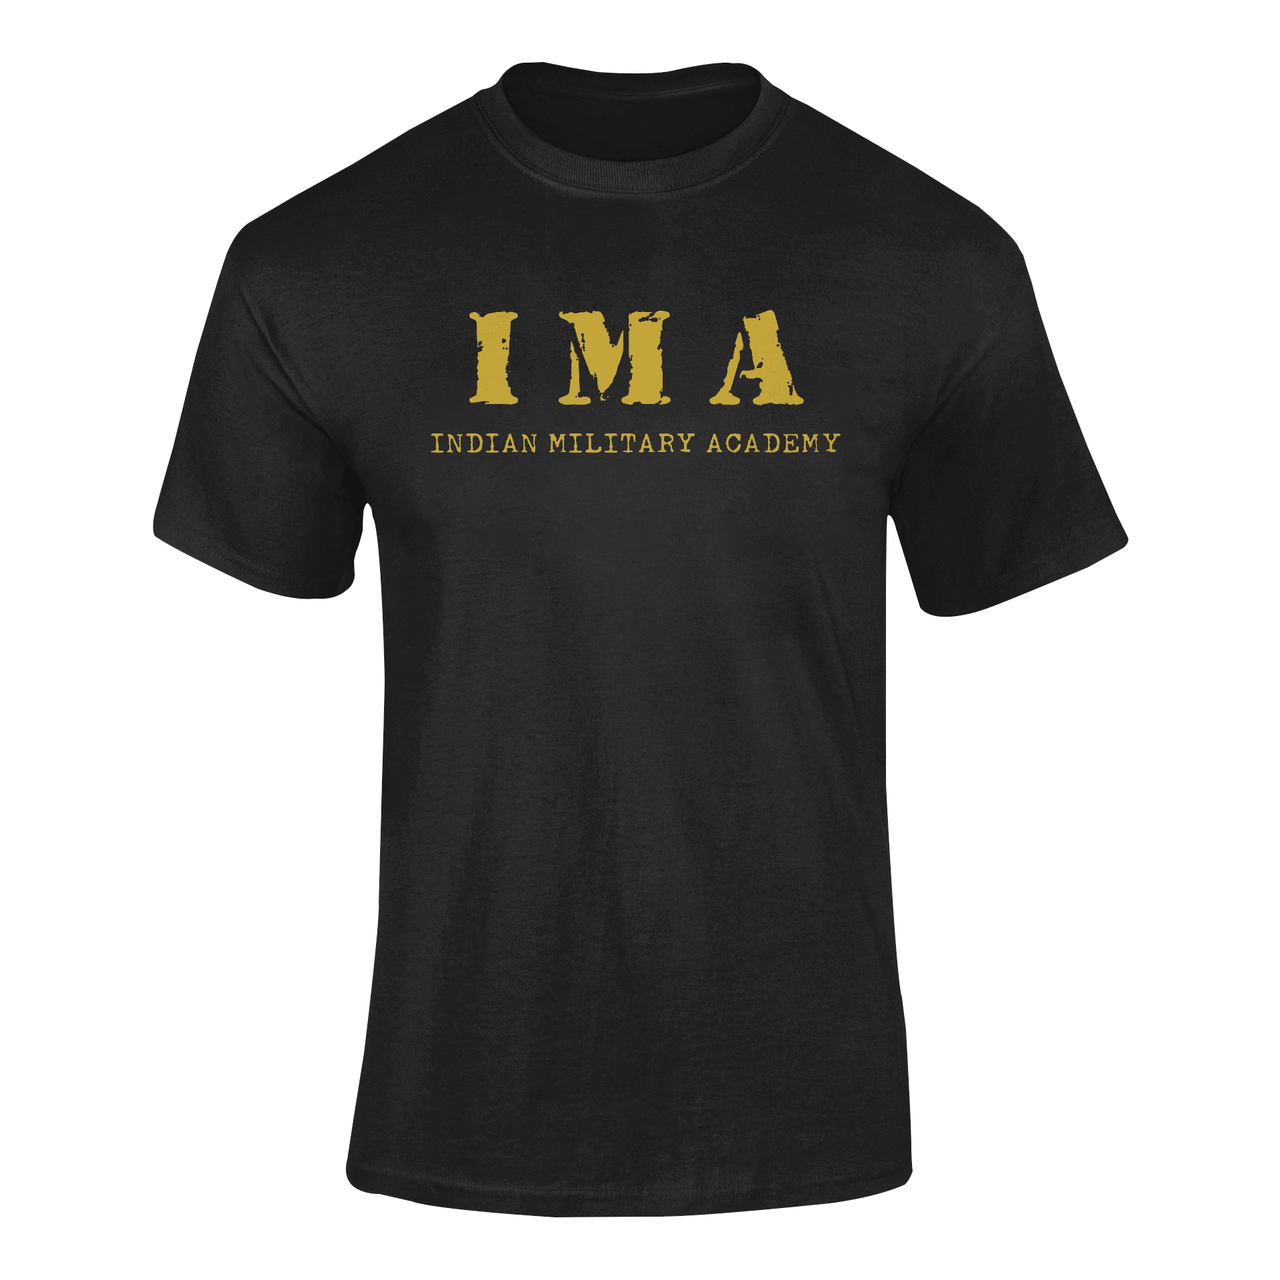 Buy Indian Military Academy IMA Coffee Mug Online at Low Prices in India -  Amazon.in